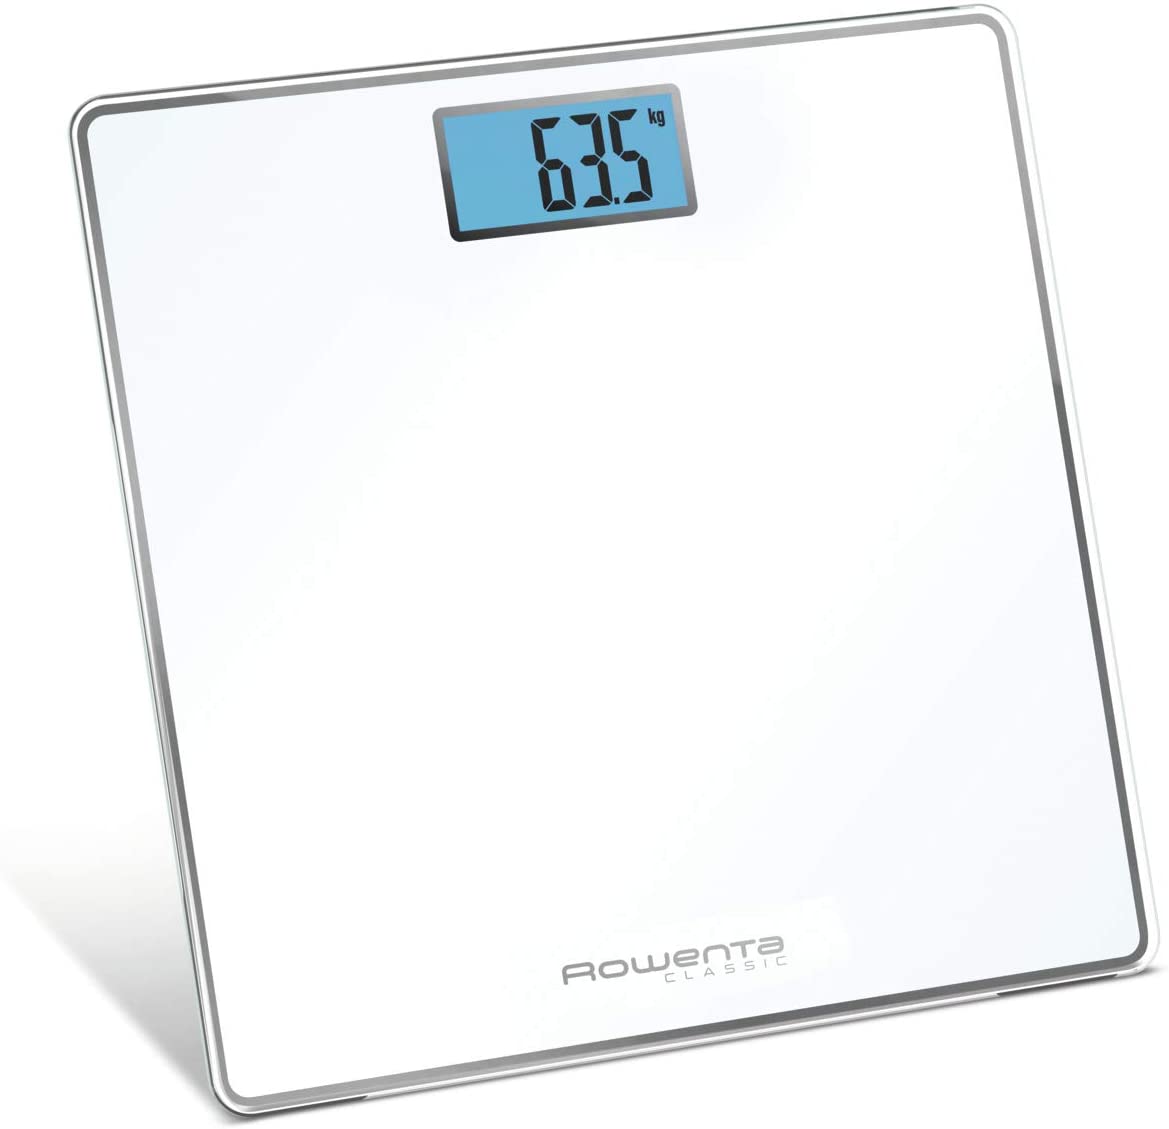 Rowenta BS1501 Classic Electronic Personal Scale, 31 x 31 cm, up to 160 kg with precision scale per 100 g, 22 mm thick, batteries included, tempered glass, white.